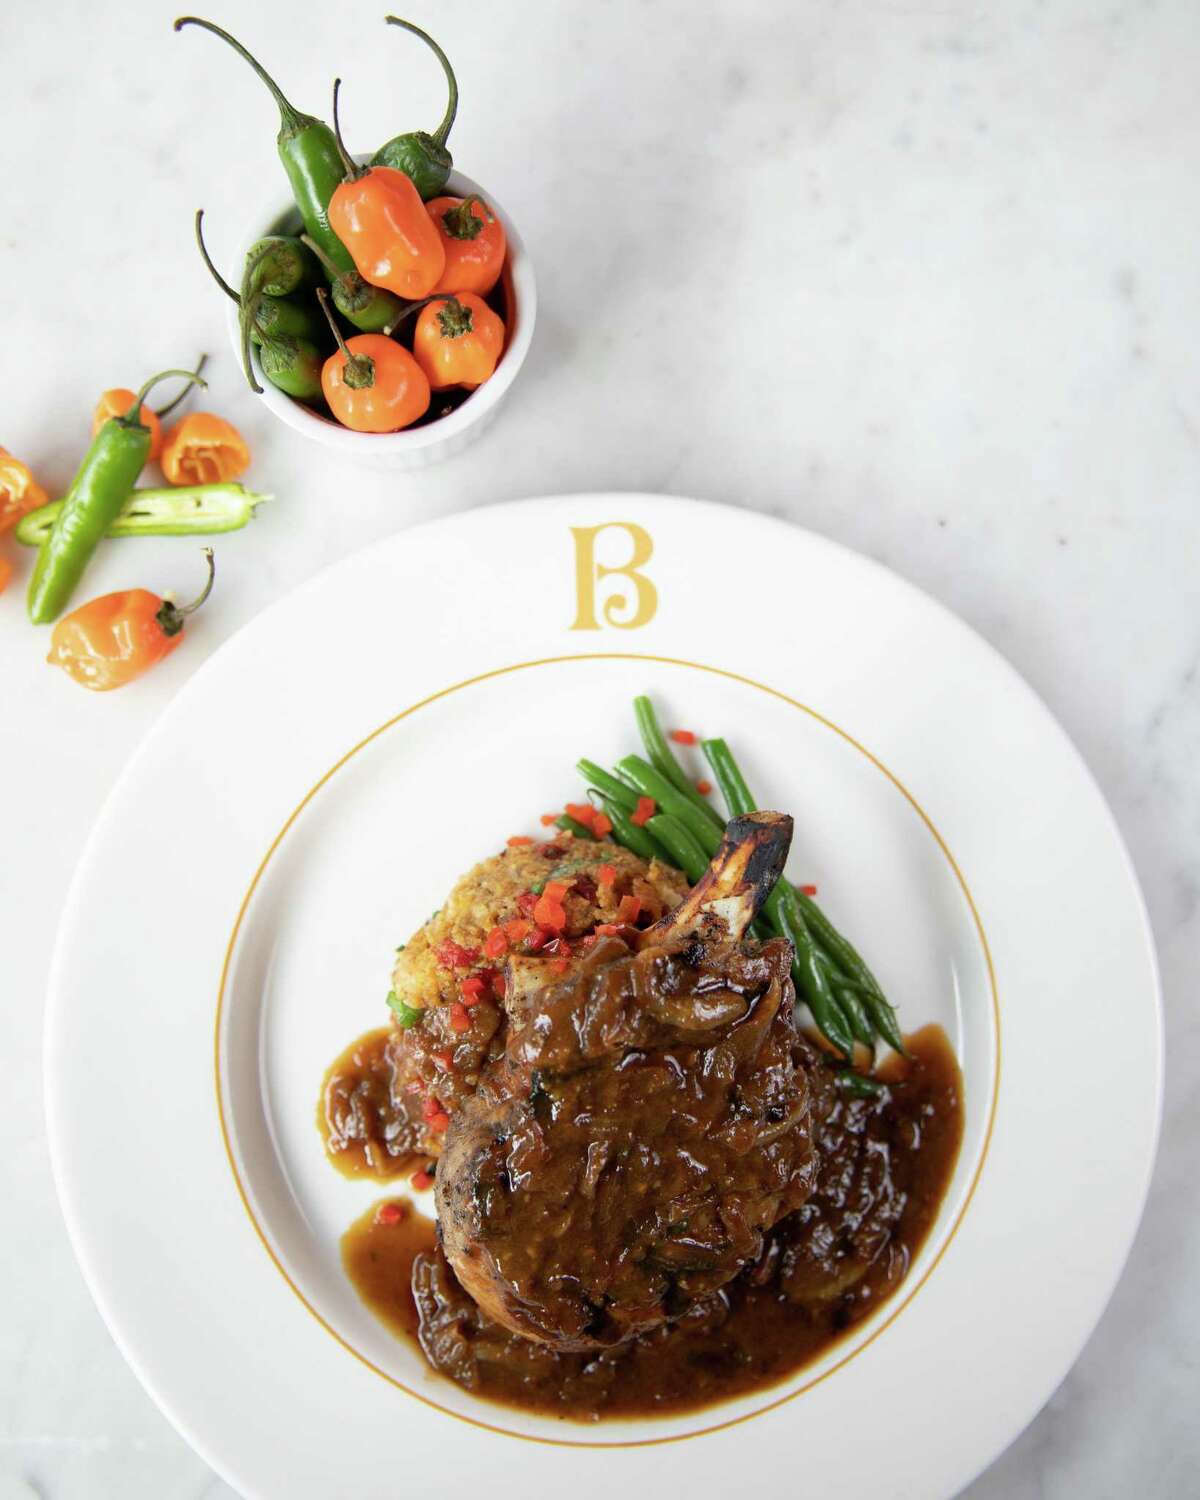 Creole-spiced smothered pork chops from a heritage menu to mark the 100-year anniversary of Broussard's Restaurant.